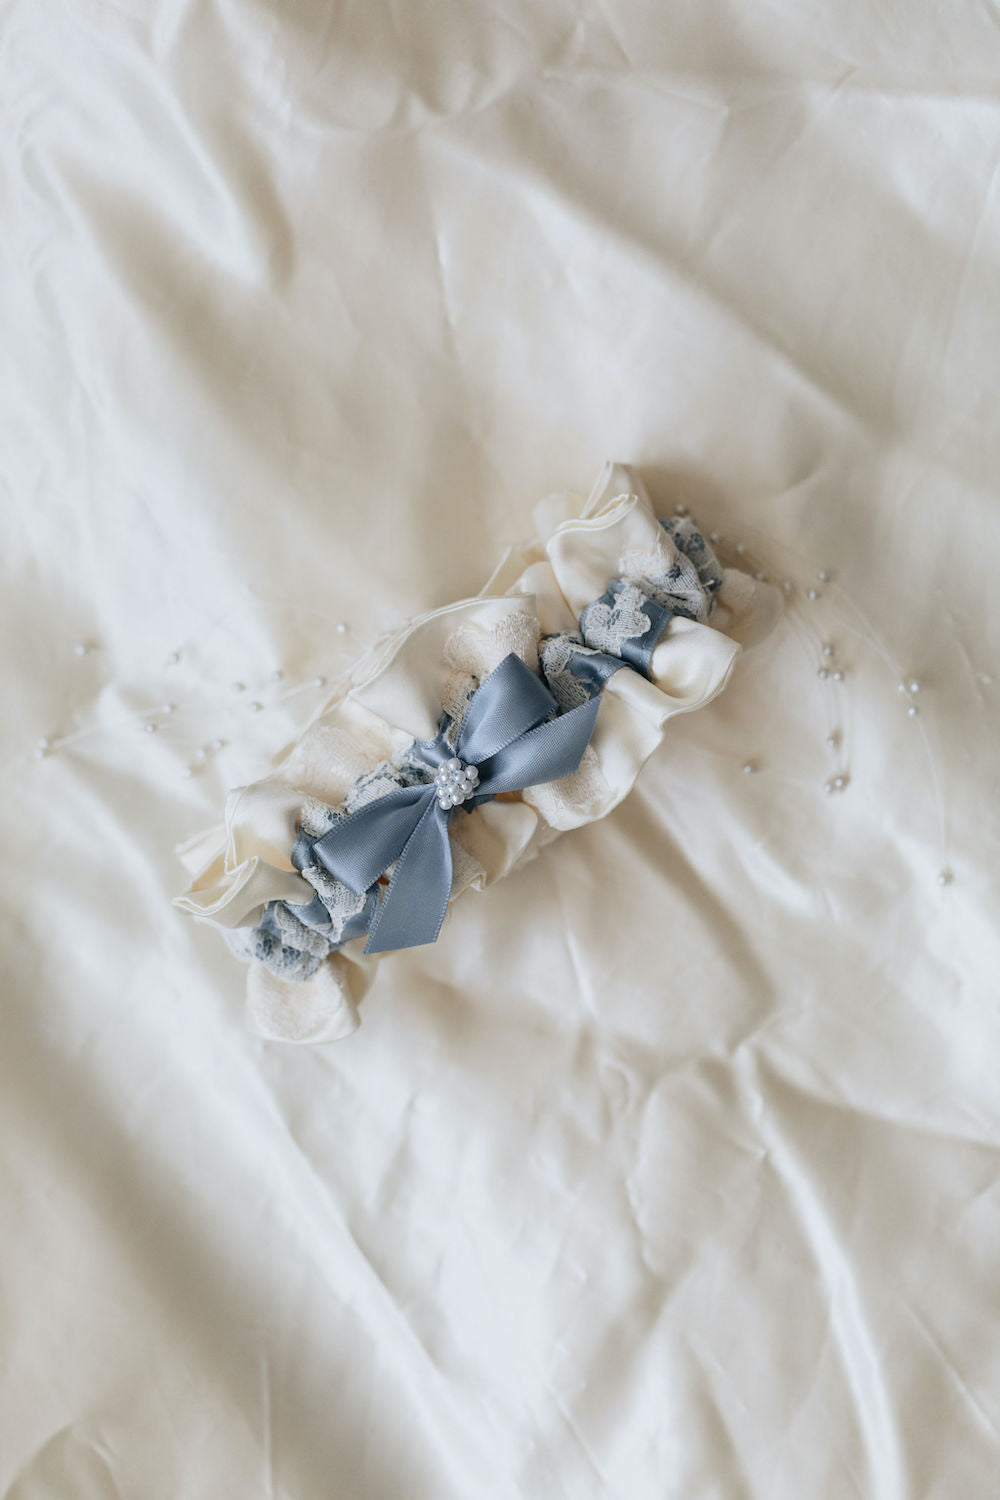 how to use great grandmother's satin wedding dress material - heirloom wedding garter with pearls & something blue handmade by The Garter Girl